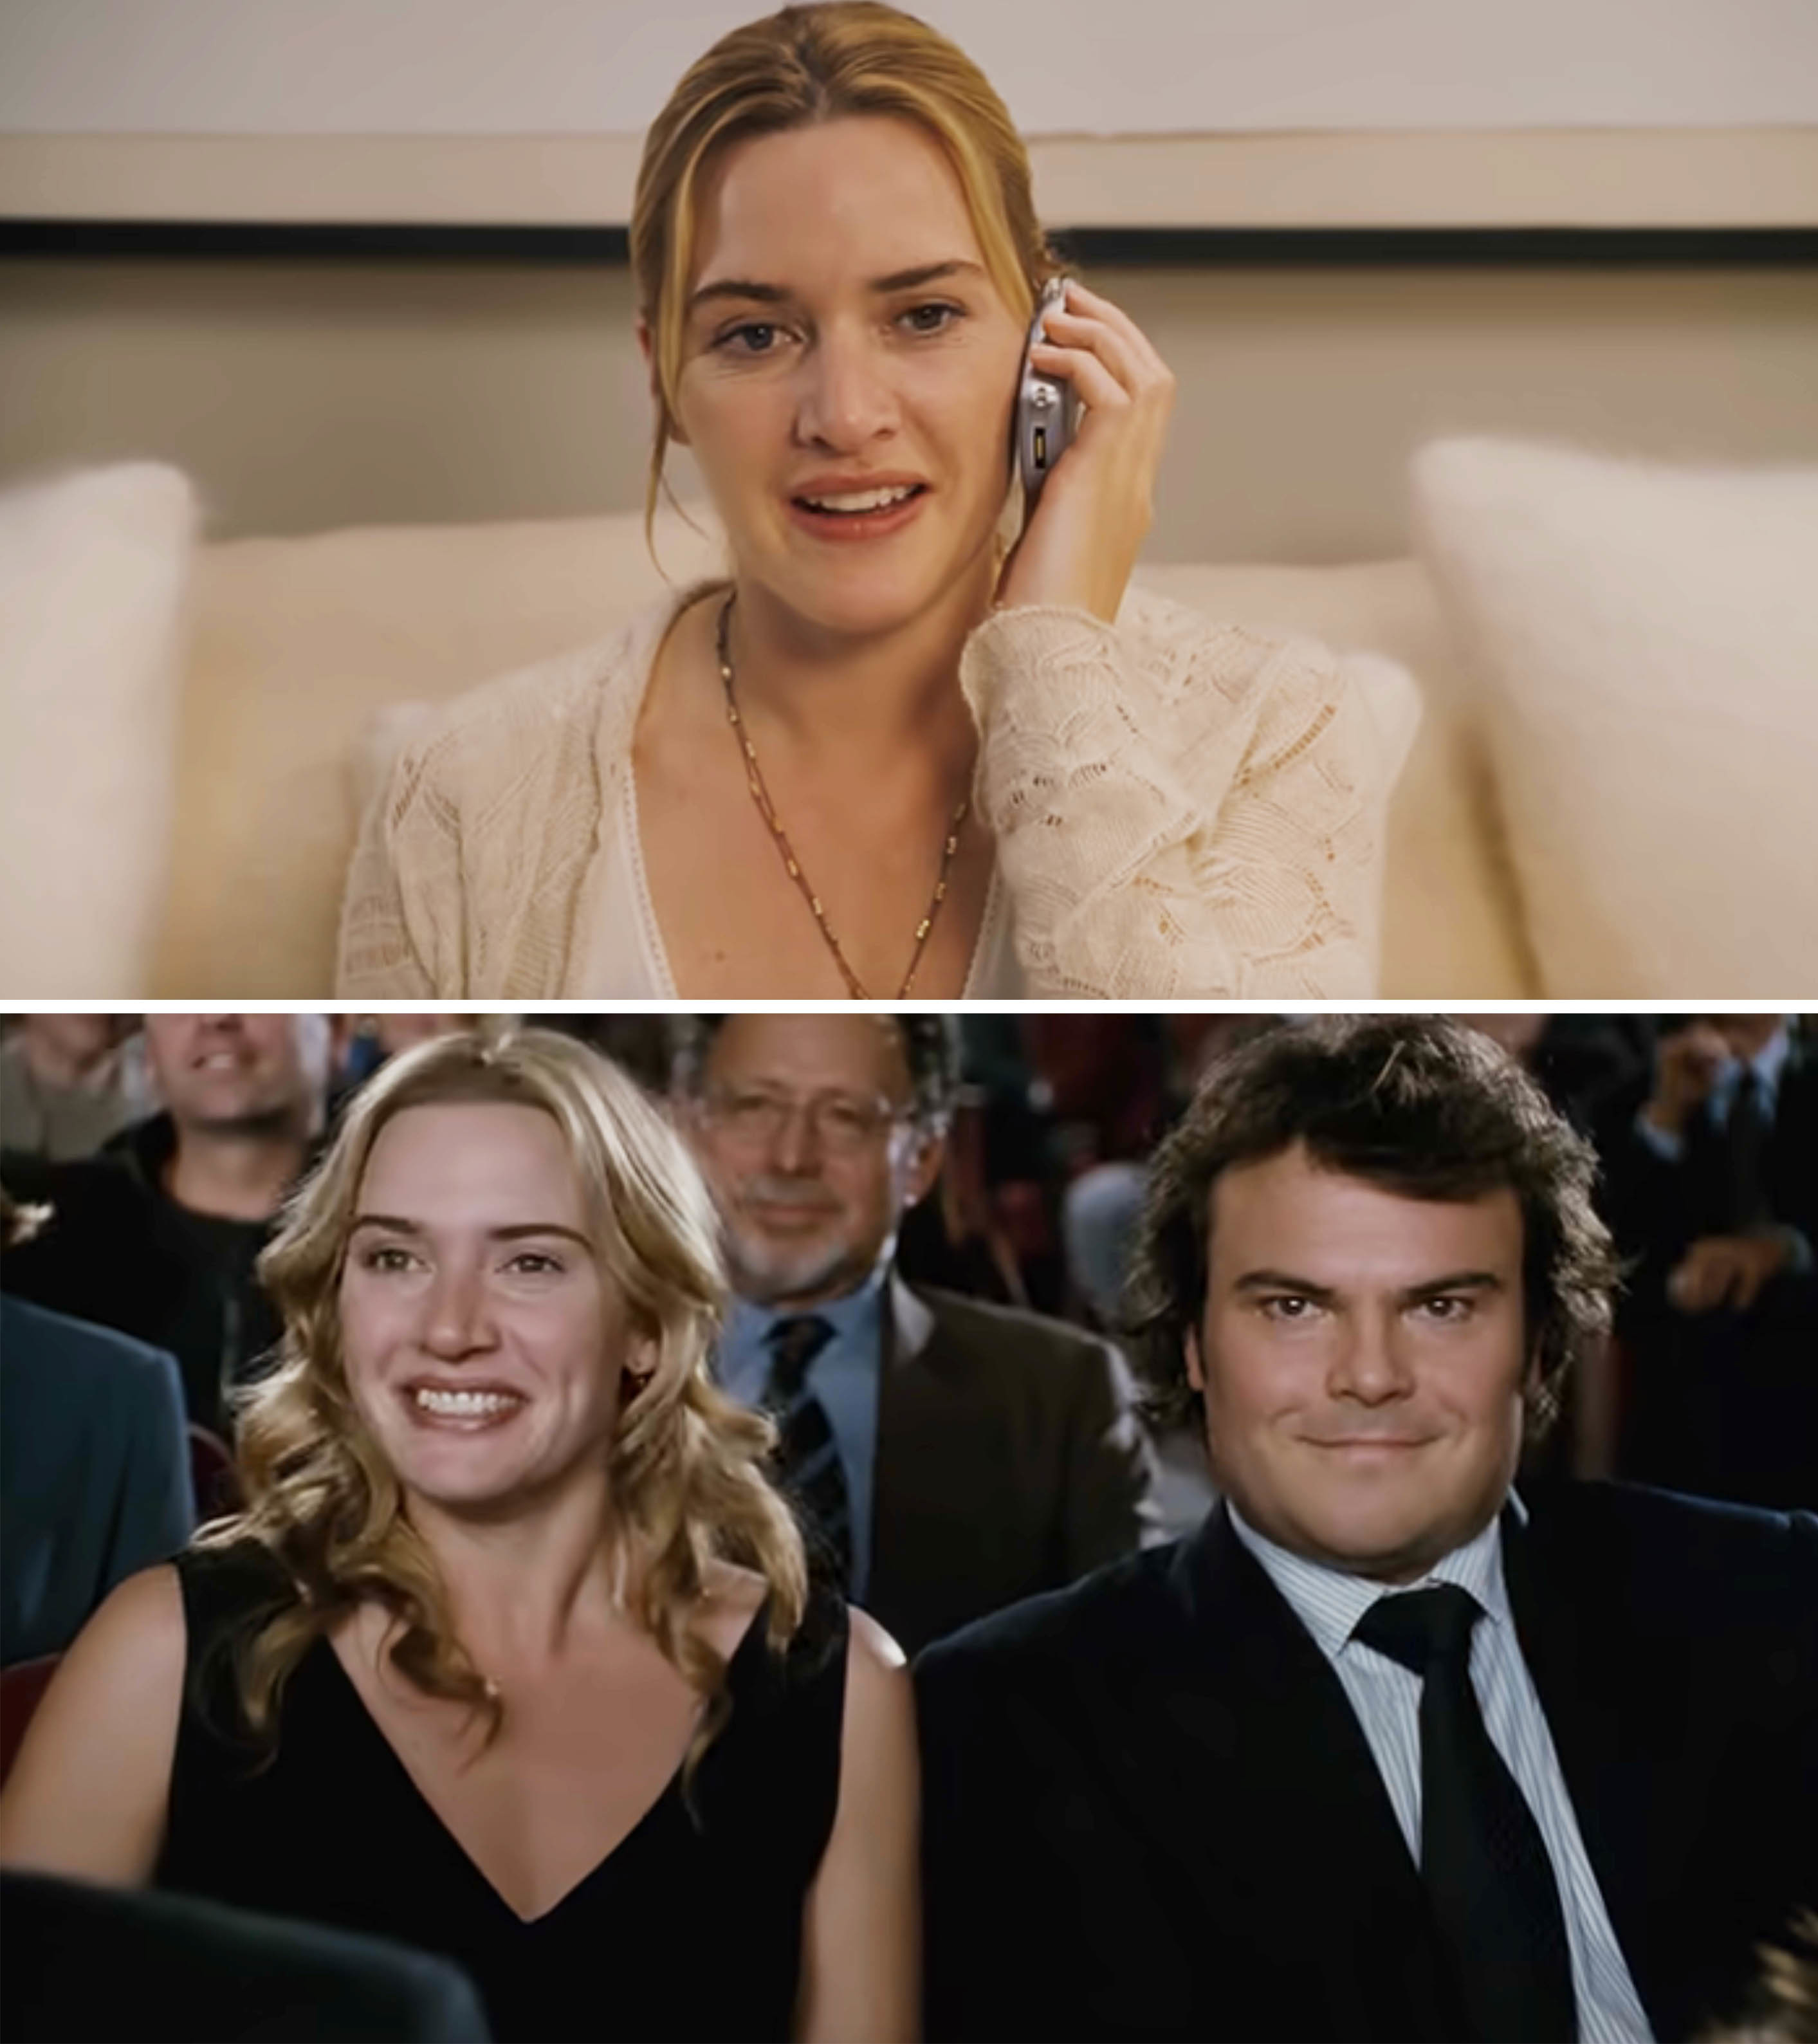 Kate Winslet in two scenes from a film, top with phone, bottom laughing next to Jack Black in The Holiday